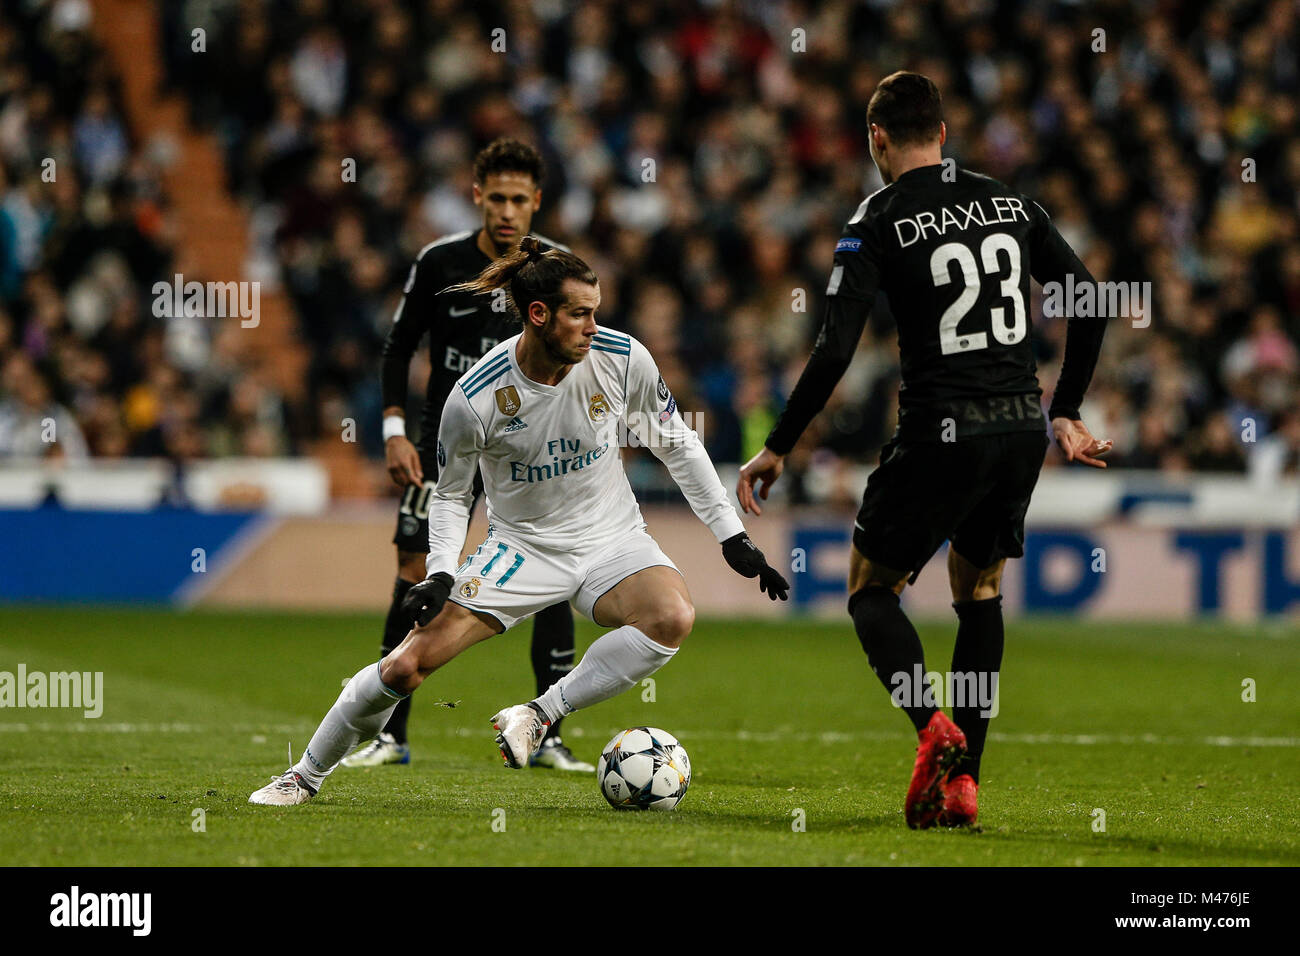 Gareth Bale (Real Madrid) fights for control of the ball with Julian Draxler (PSG), UCL Champions League match between Real Madrid vs PSG at the Santiago Bernabeu stadium in Madrid, Spain, February 14, 2018. Credit: Gtres Información más Comuniación on line, S.L./Alamy Live News Stock Photo